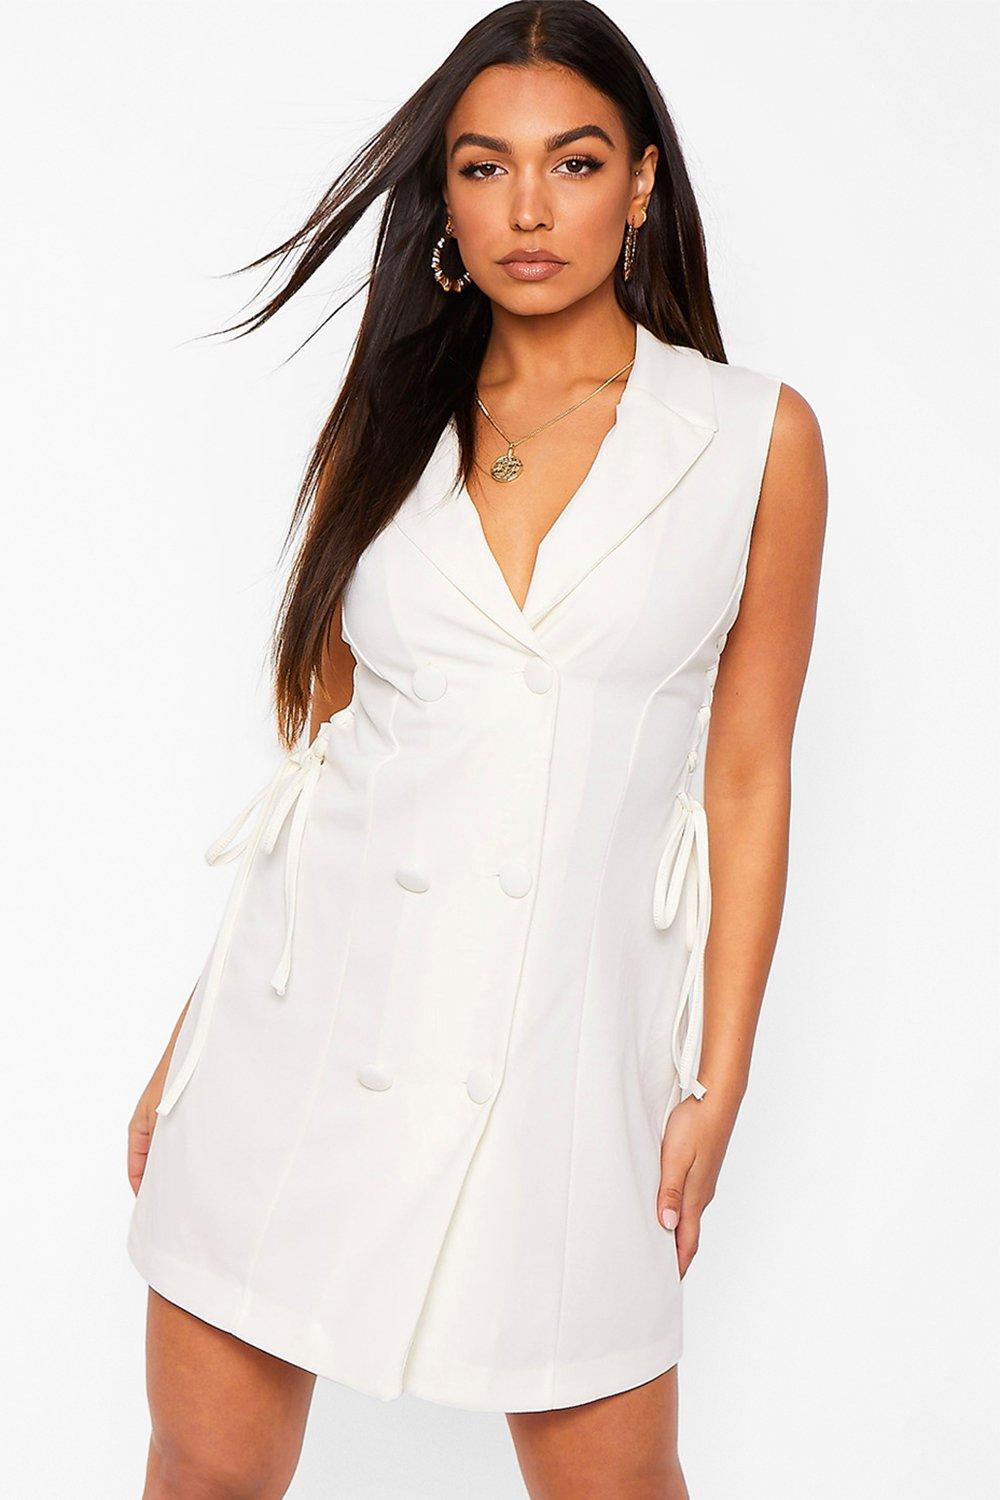 Sale Suits & Tailoring Lace Up Cut Out Side Tailored Blazer Dress